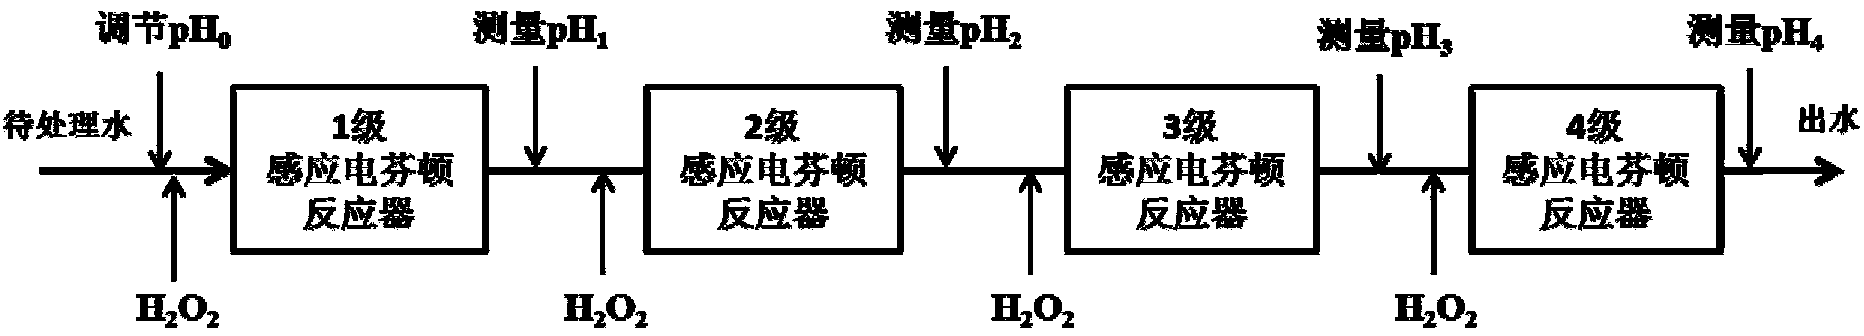 Method for regulating multistage-cascade induction electro-Fenton by graded addition of H2O2 on basis of pH indication